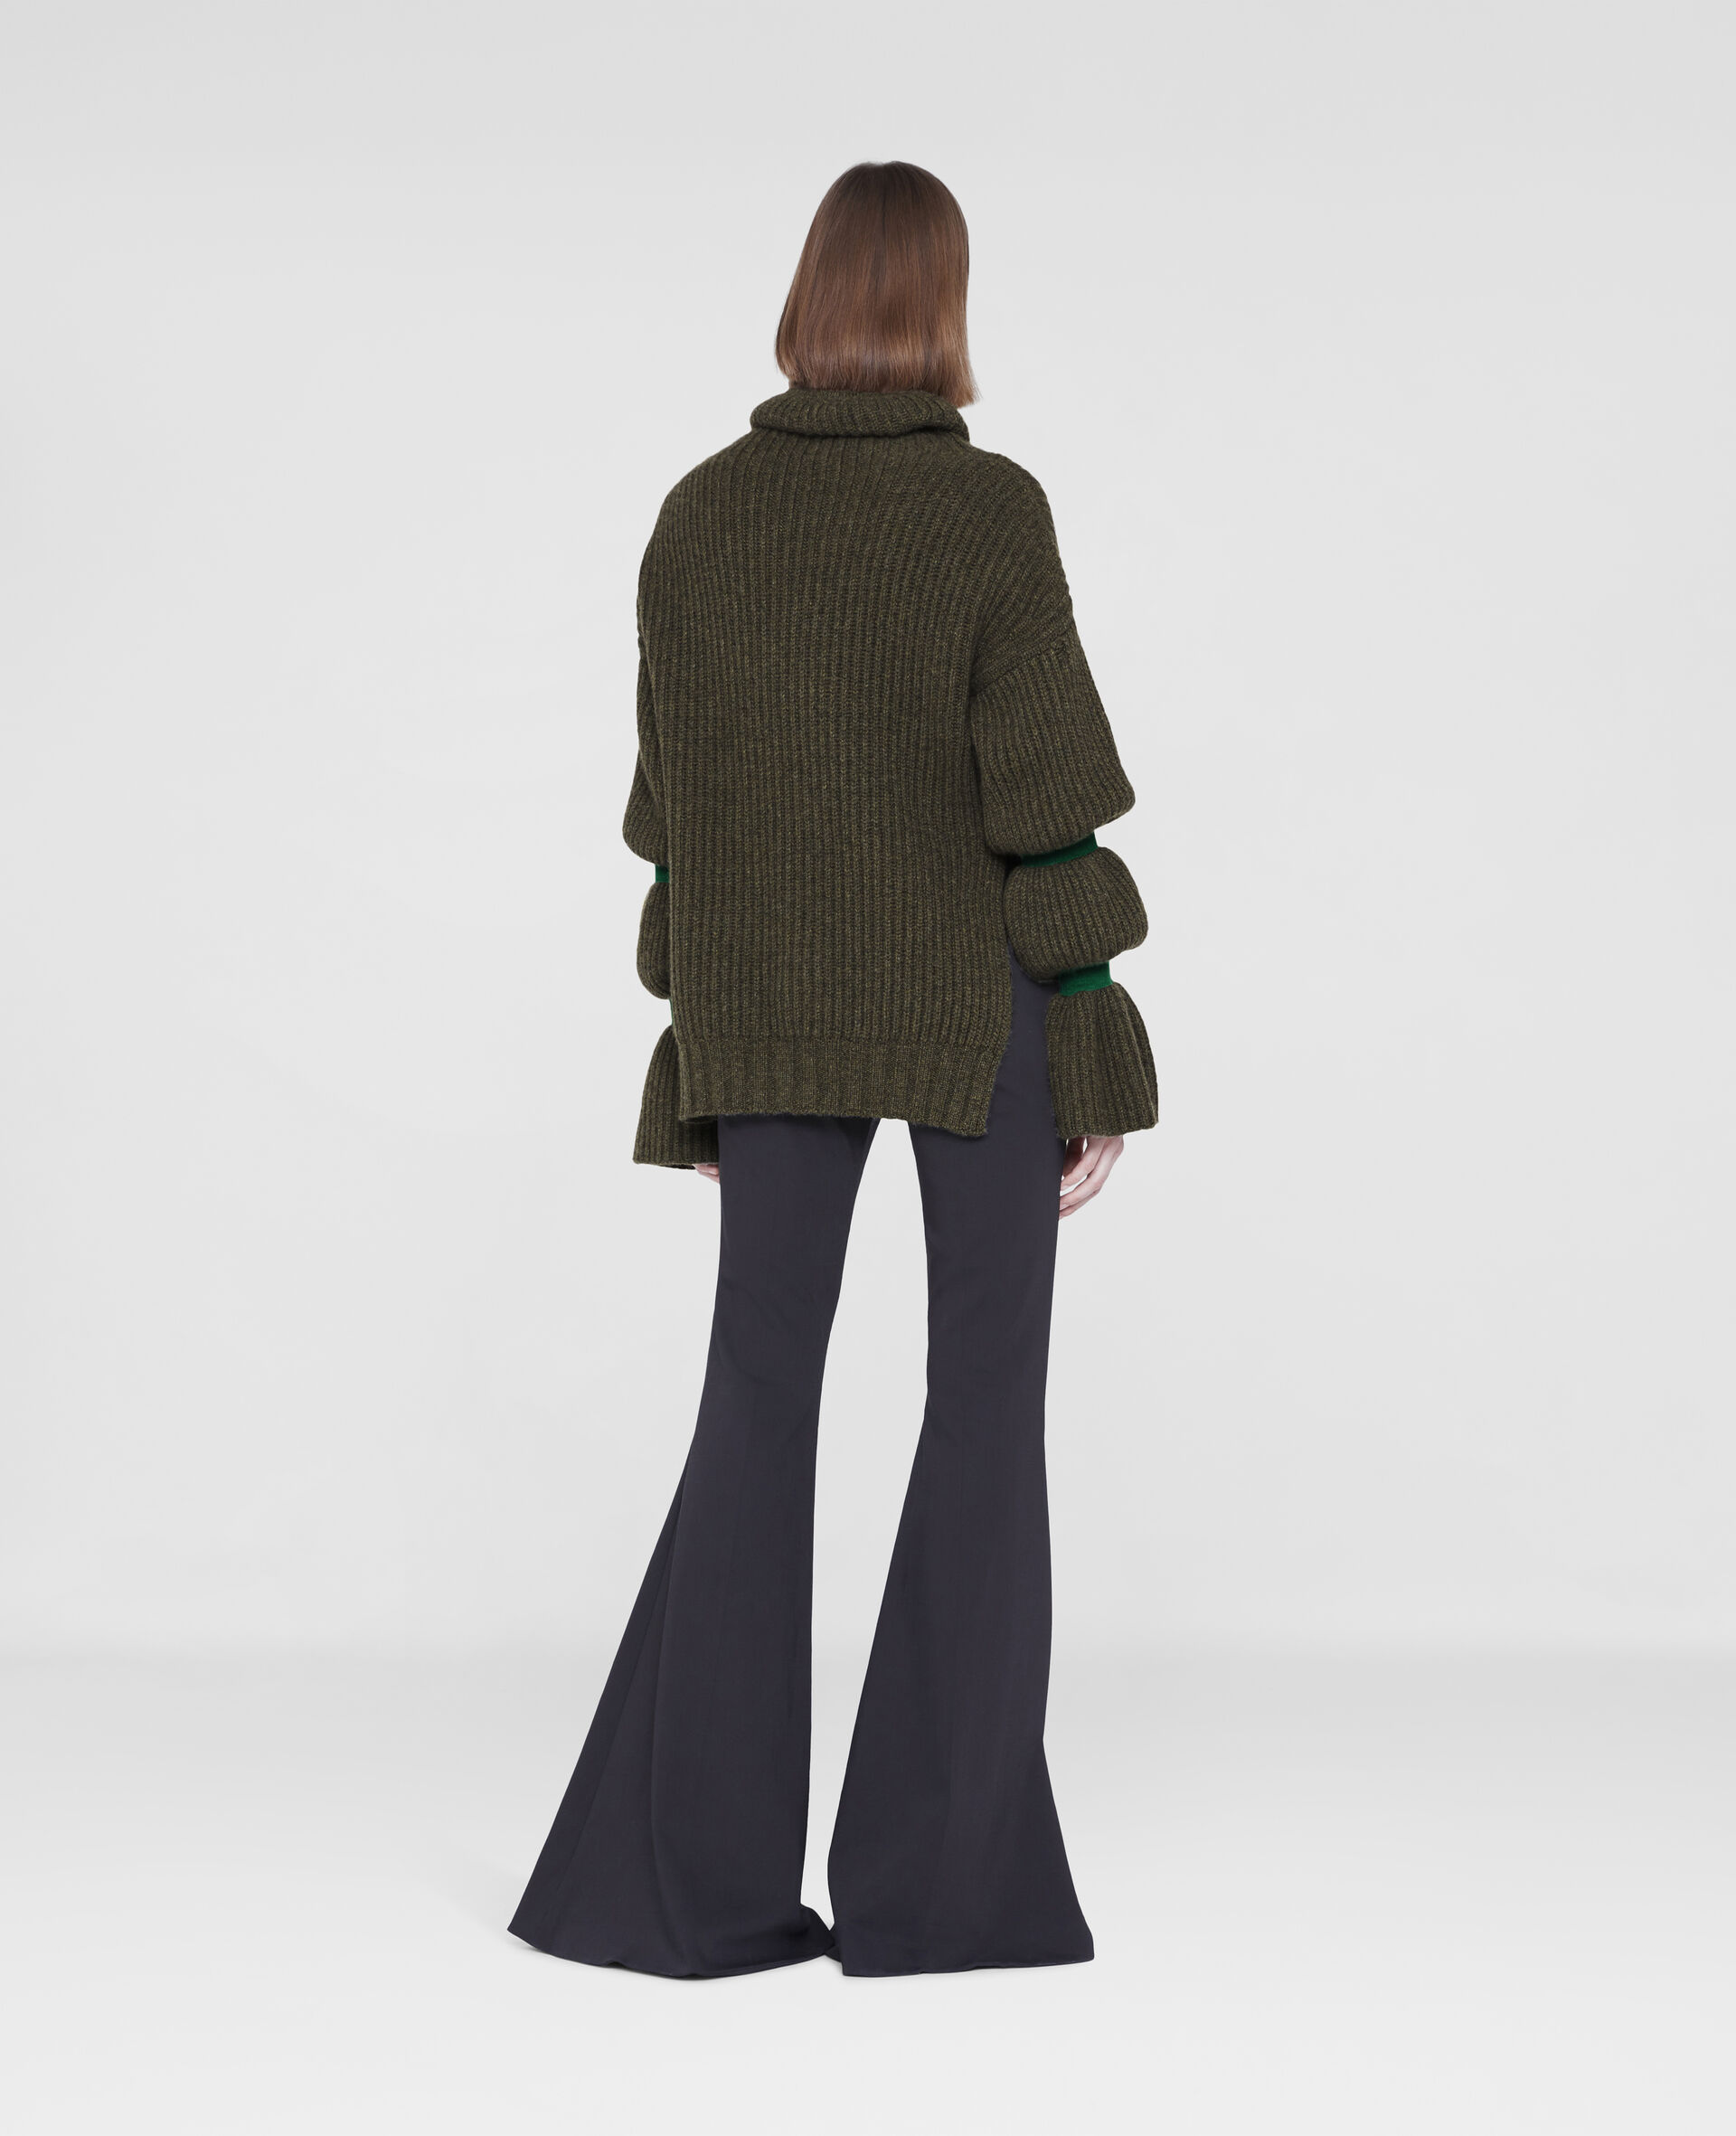 Soft Volume Sweater-Green-large image number 2